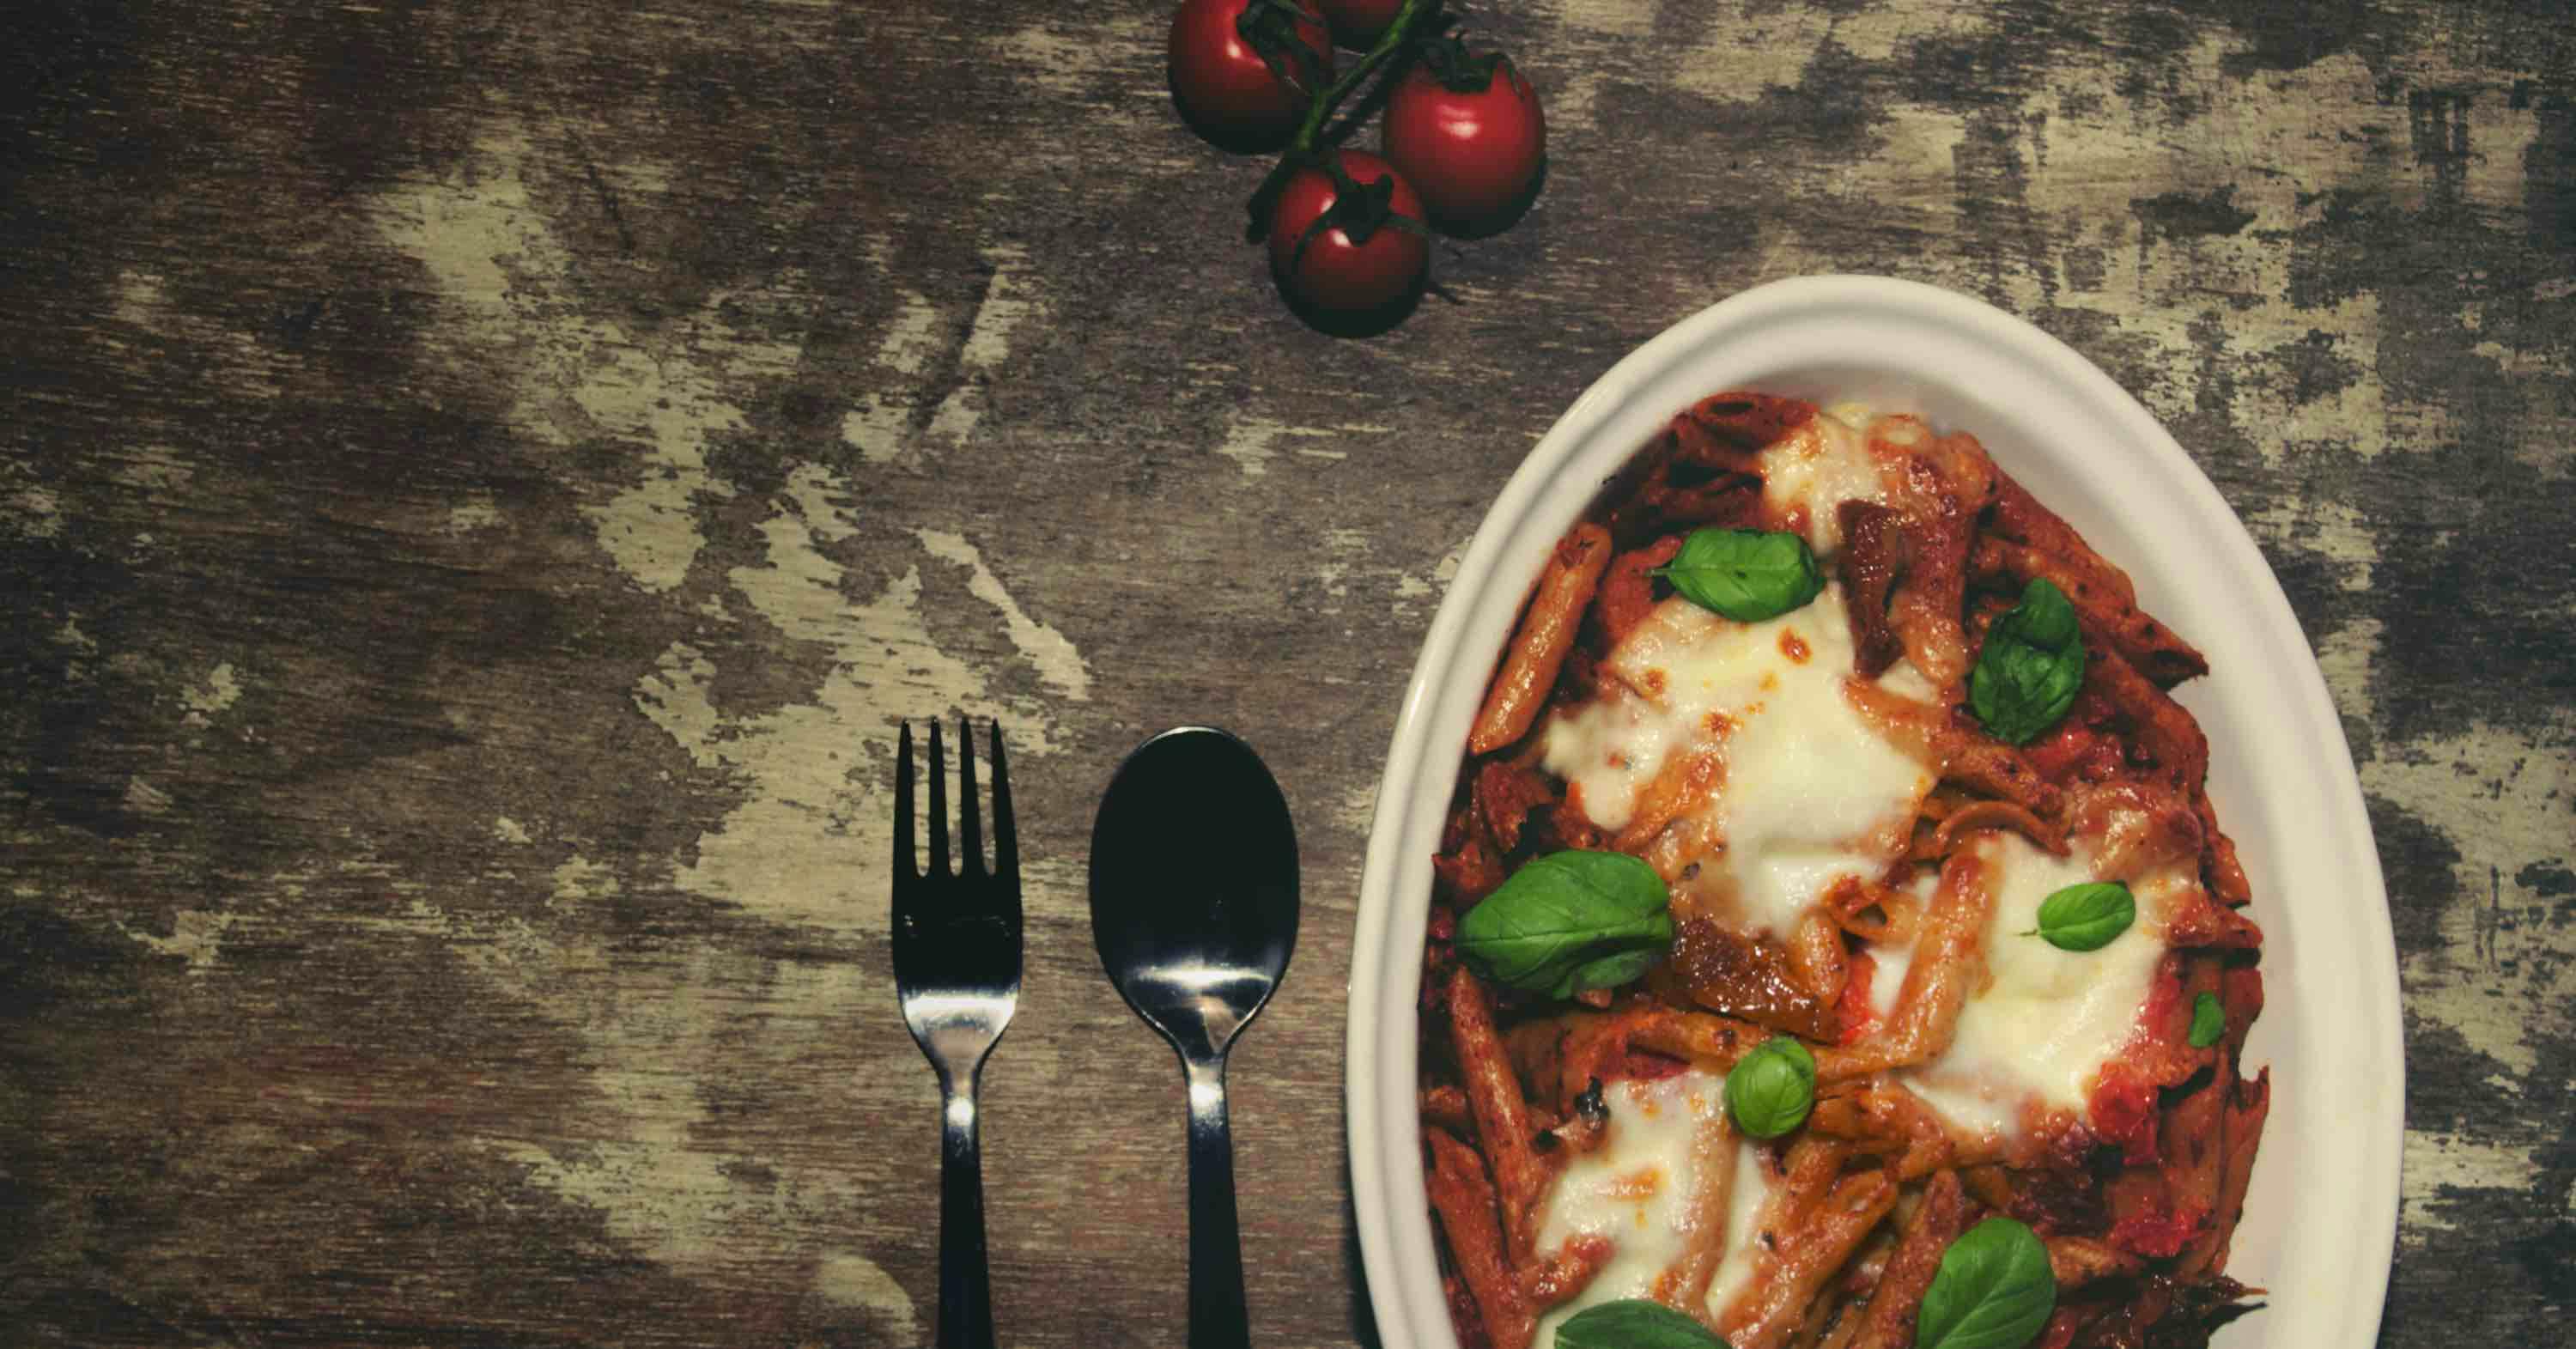 Mouth watering vegetarian pasta bake with rich tomato sauce and cheese toppings